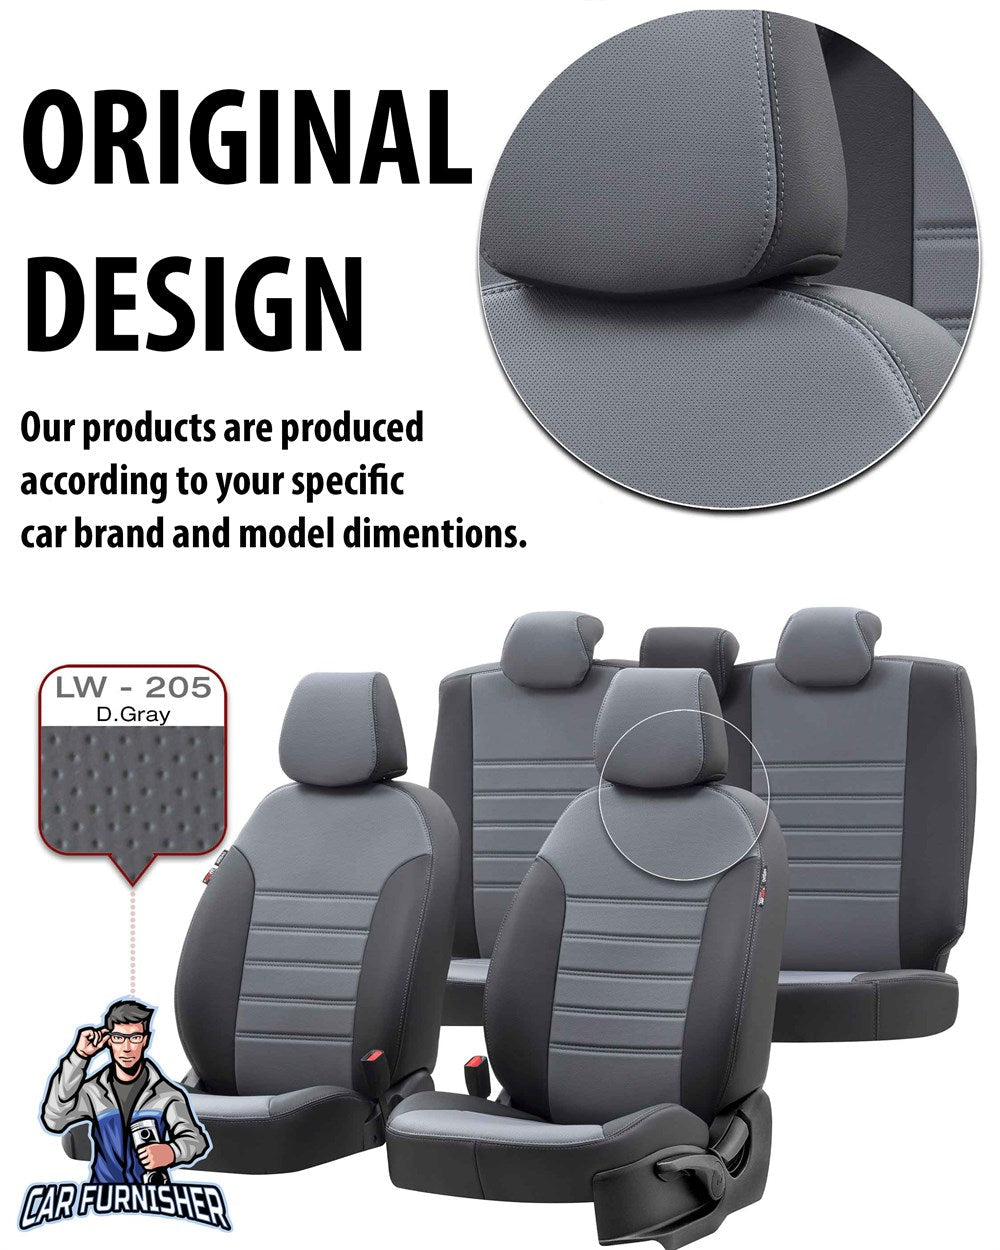 Honda HRV Seat Covers Istanbul Leather Design Smoked Leather